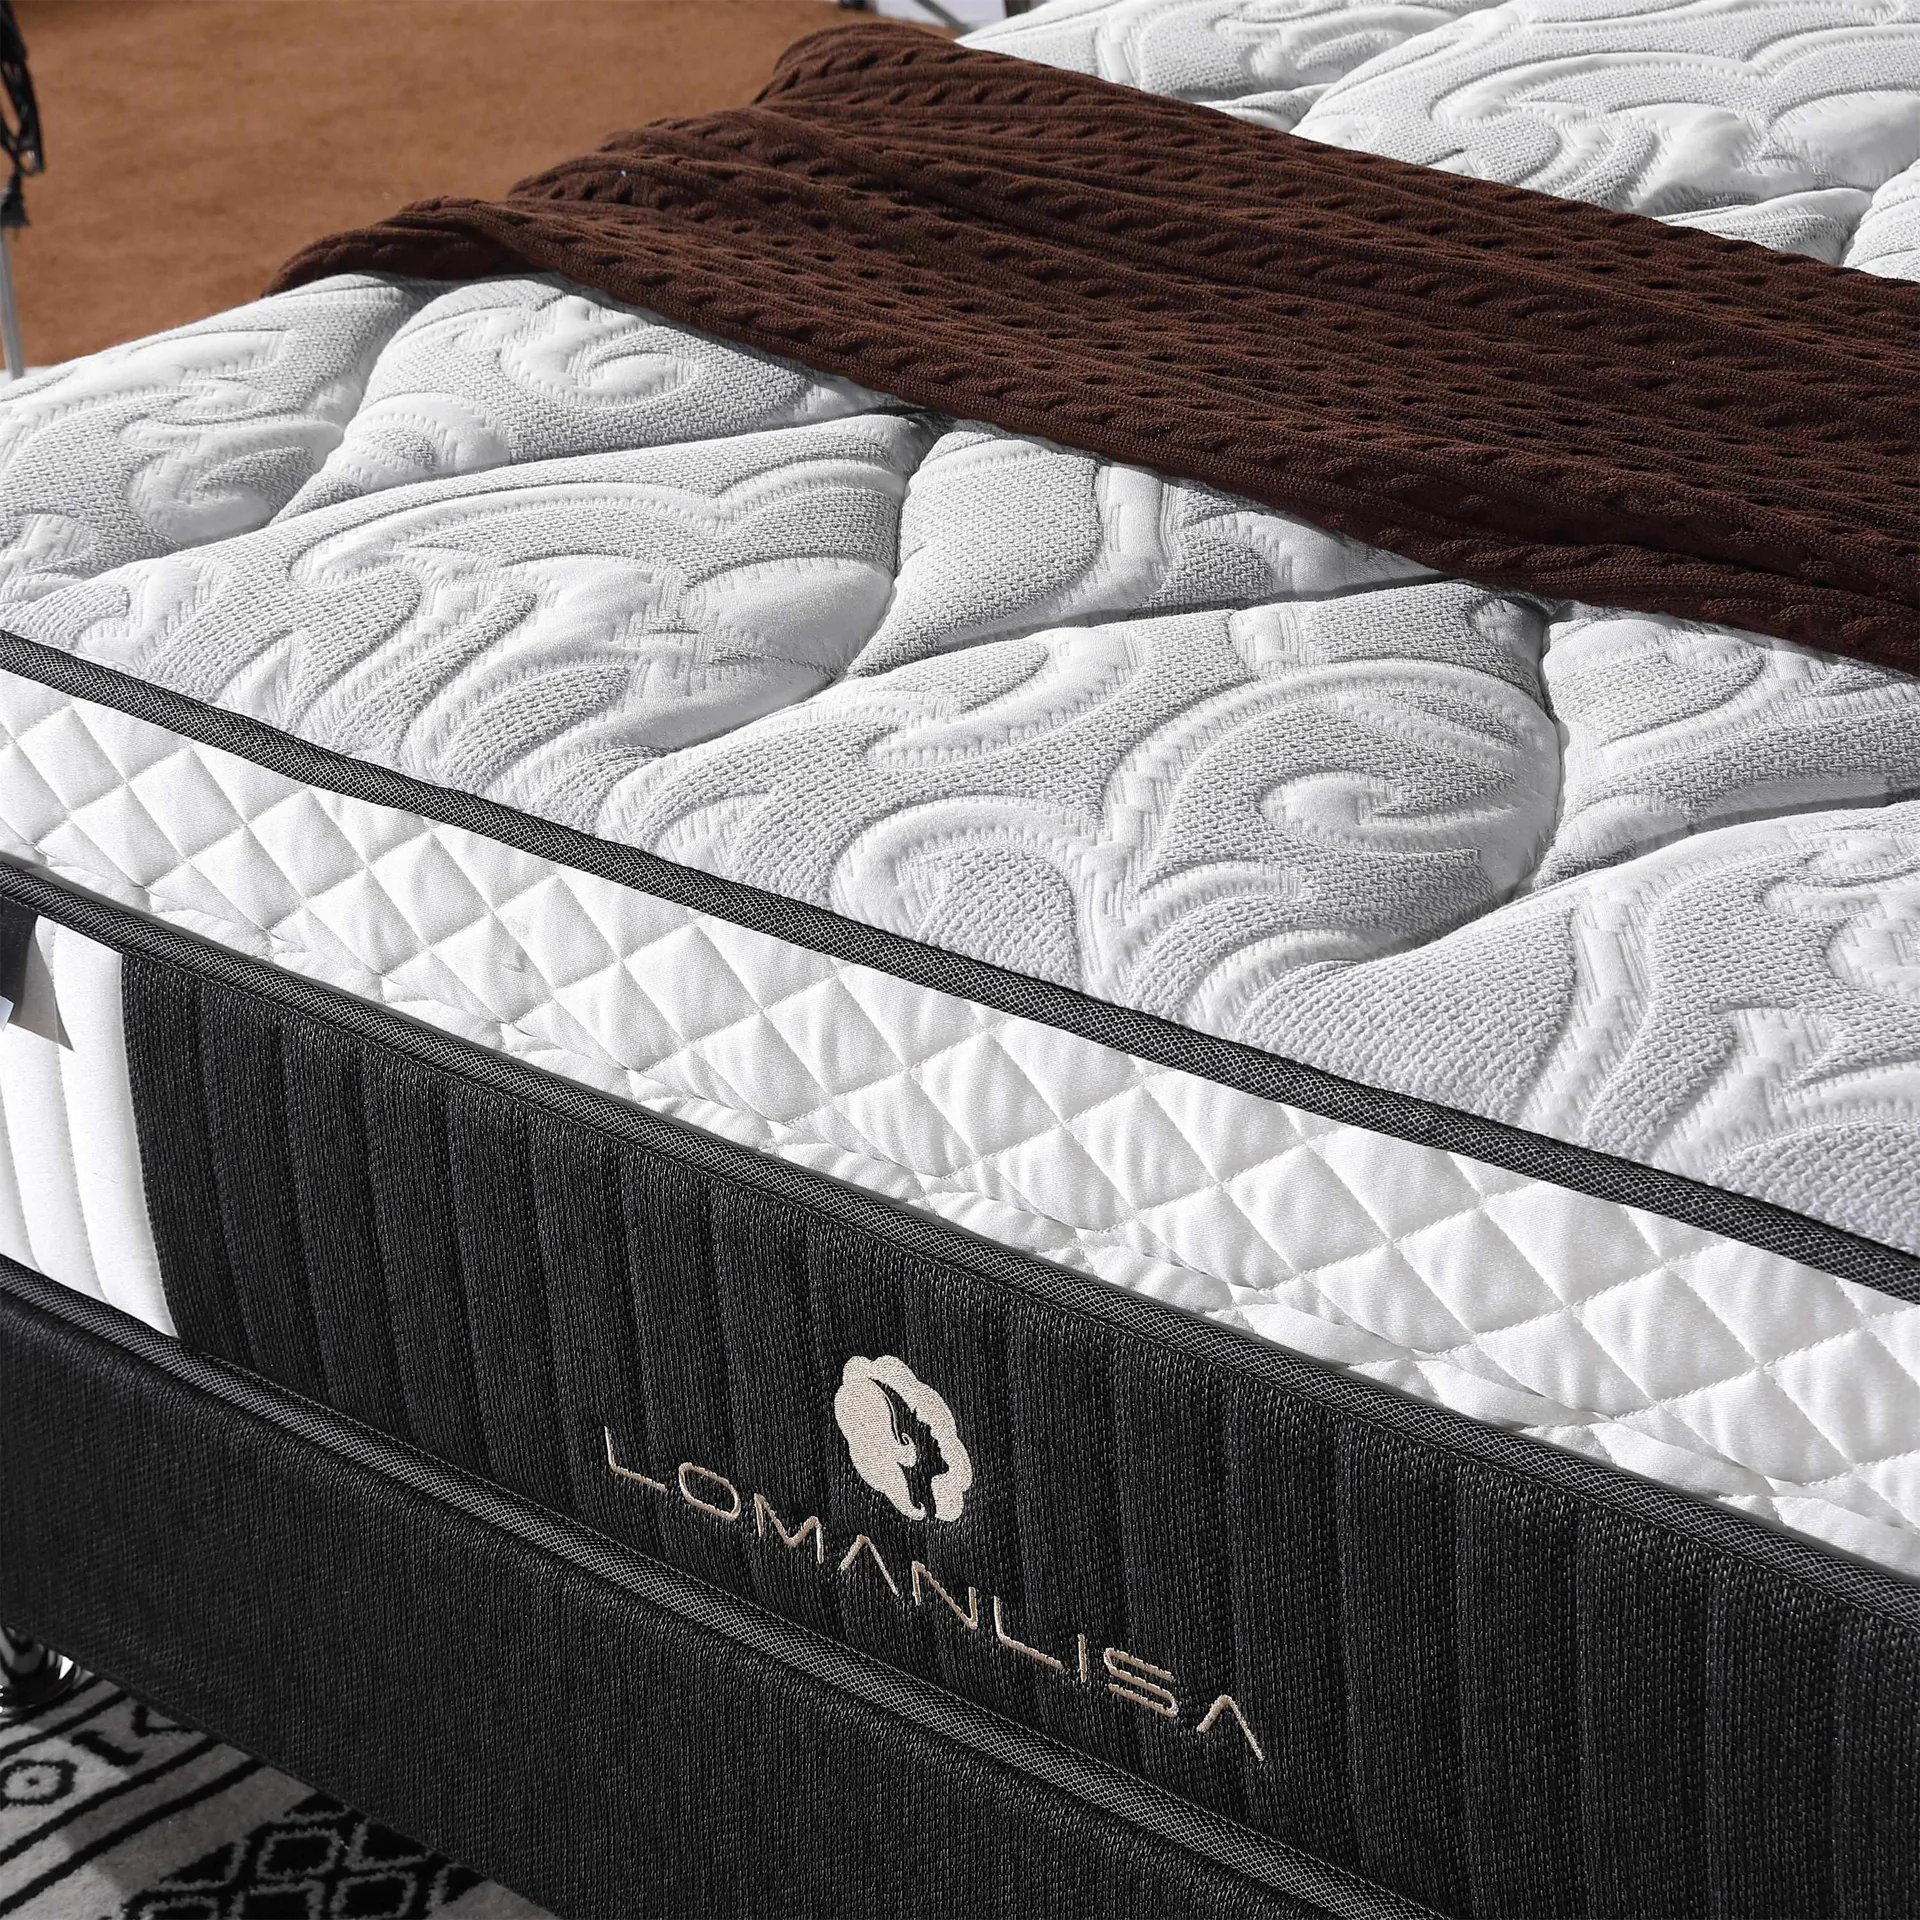 Double Layers 5 Zoned Pocket Spring Mattress Luxury Design With Convoluted Foam